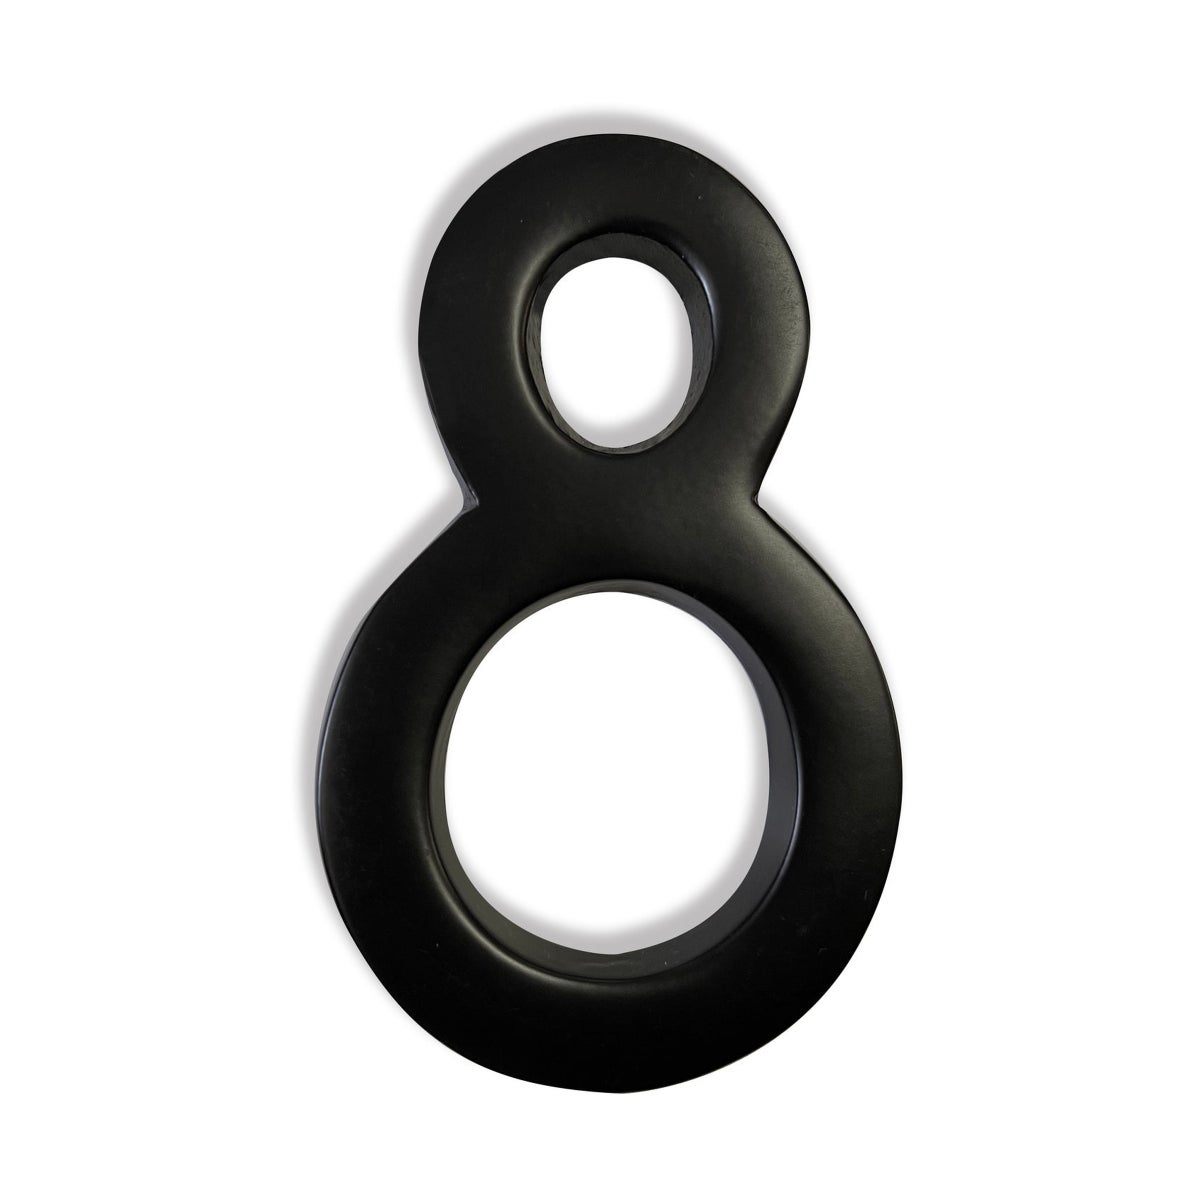 "Magnetic Aluminum House Number #8, 4 in, Black"